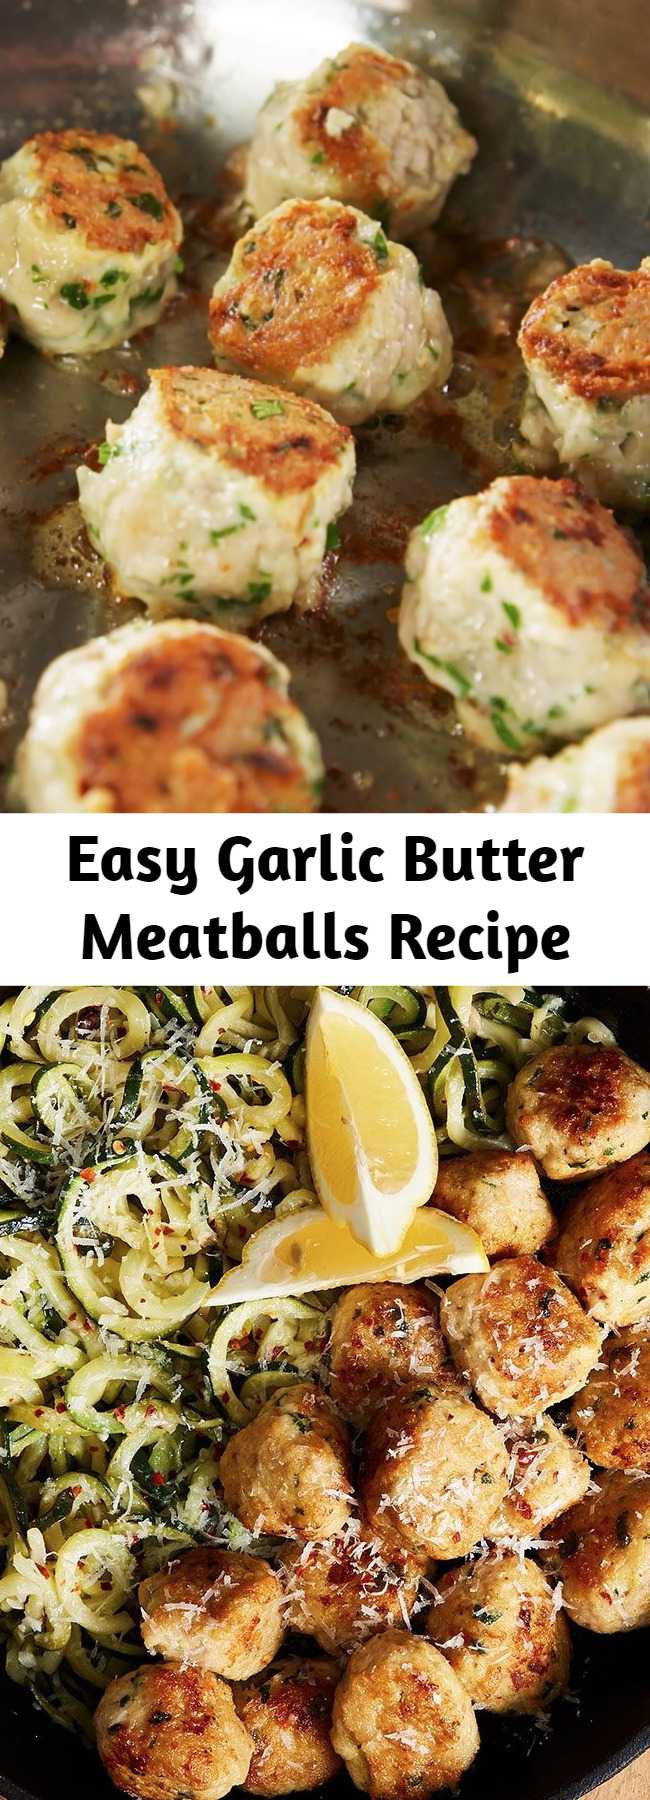 Easy Garlic Butter Meatballs Recipe - These garlic butter meatballs are low-carb, gluten free, and all around better for you without skipping out on any of the tastiness. #easy #recipe #glutenfree #lowcarb #healthy #garlic #butter #meatballs #chicken #easy #diet